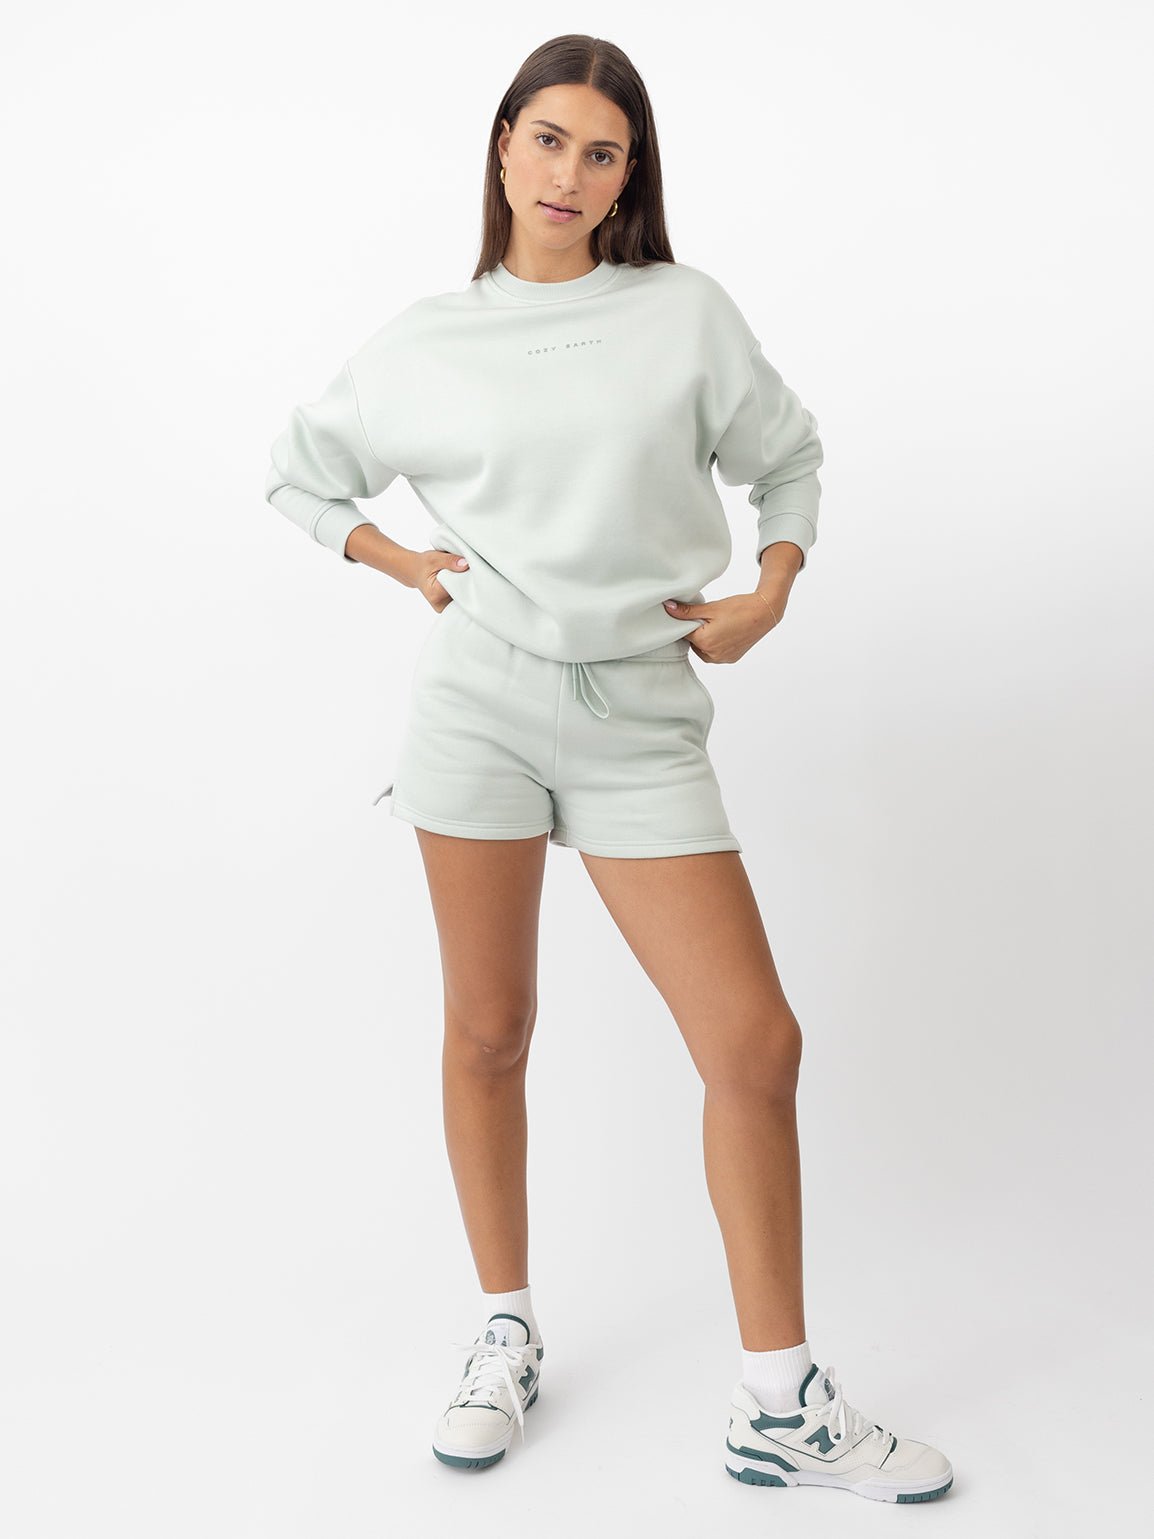 Arctic CityScape Shorts. The shorts are being worn by a female model in athletic shoes. The background it a white background. 